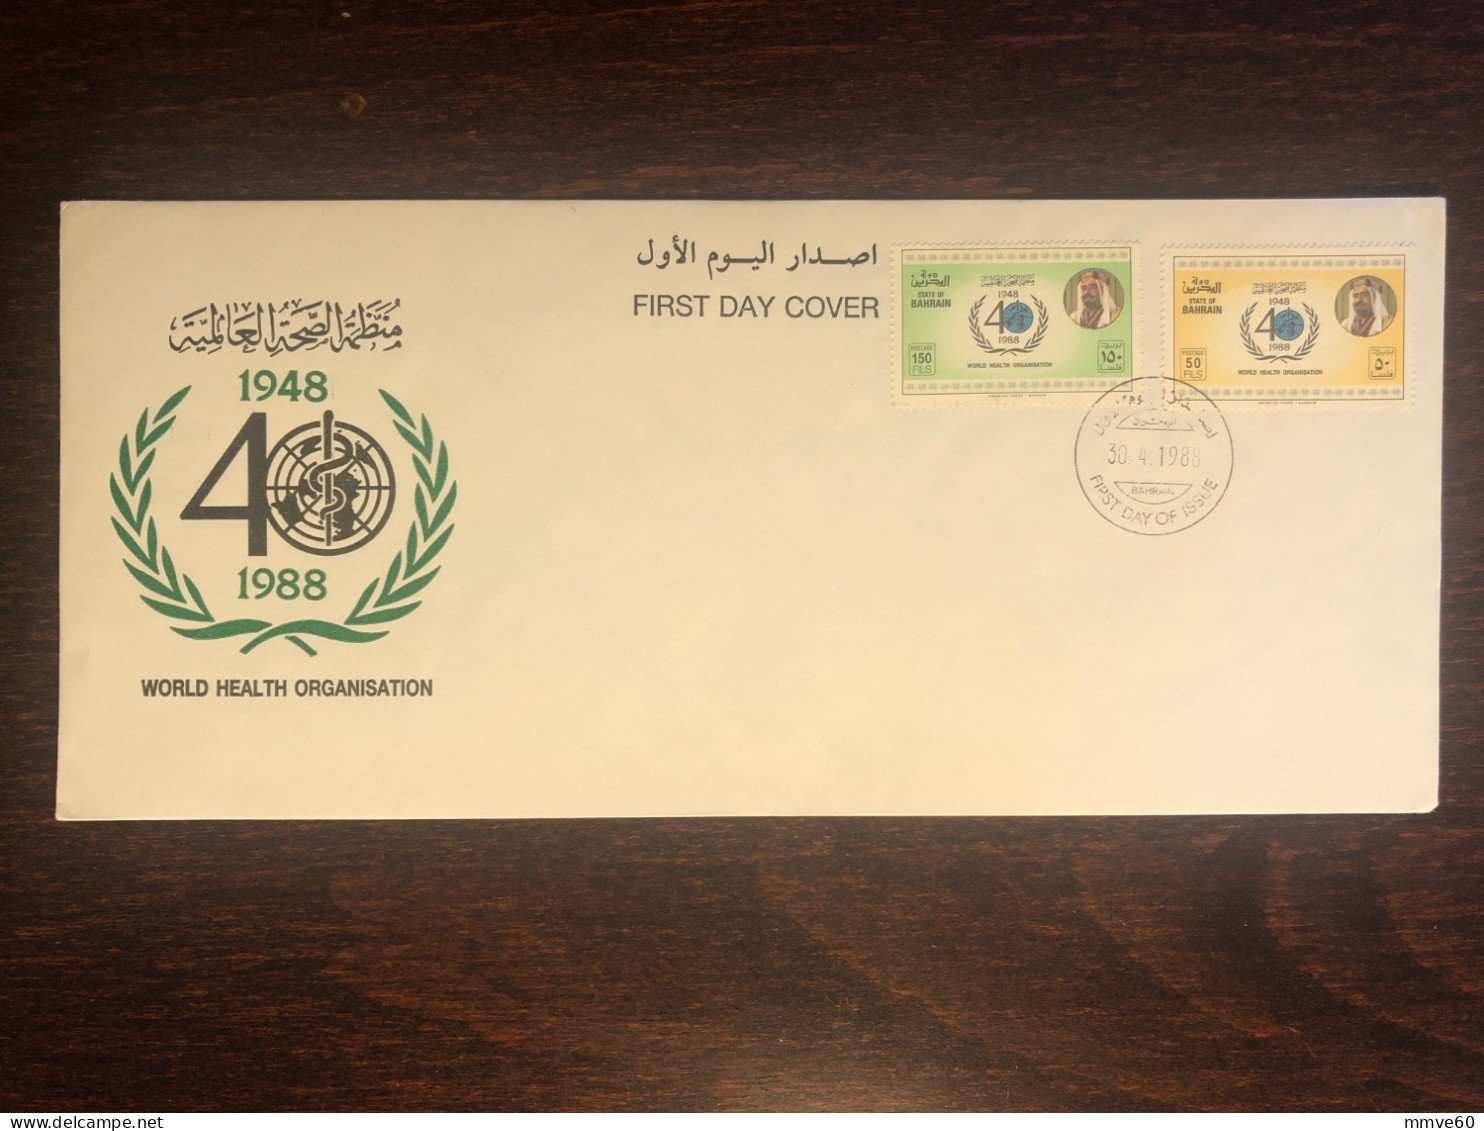 BAHRAIN FDC COVER 1988 YEAR WHO OMS HEALTH MEDICINE STAMPS - Bahrein (1965-...)